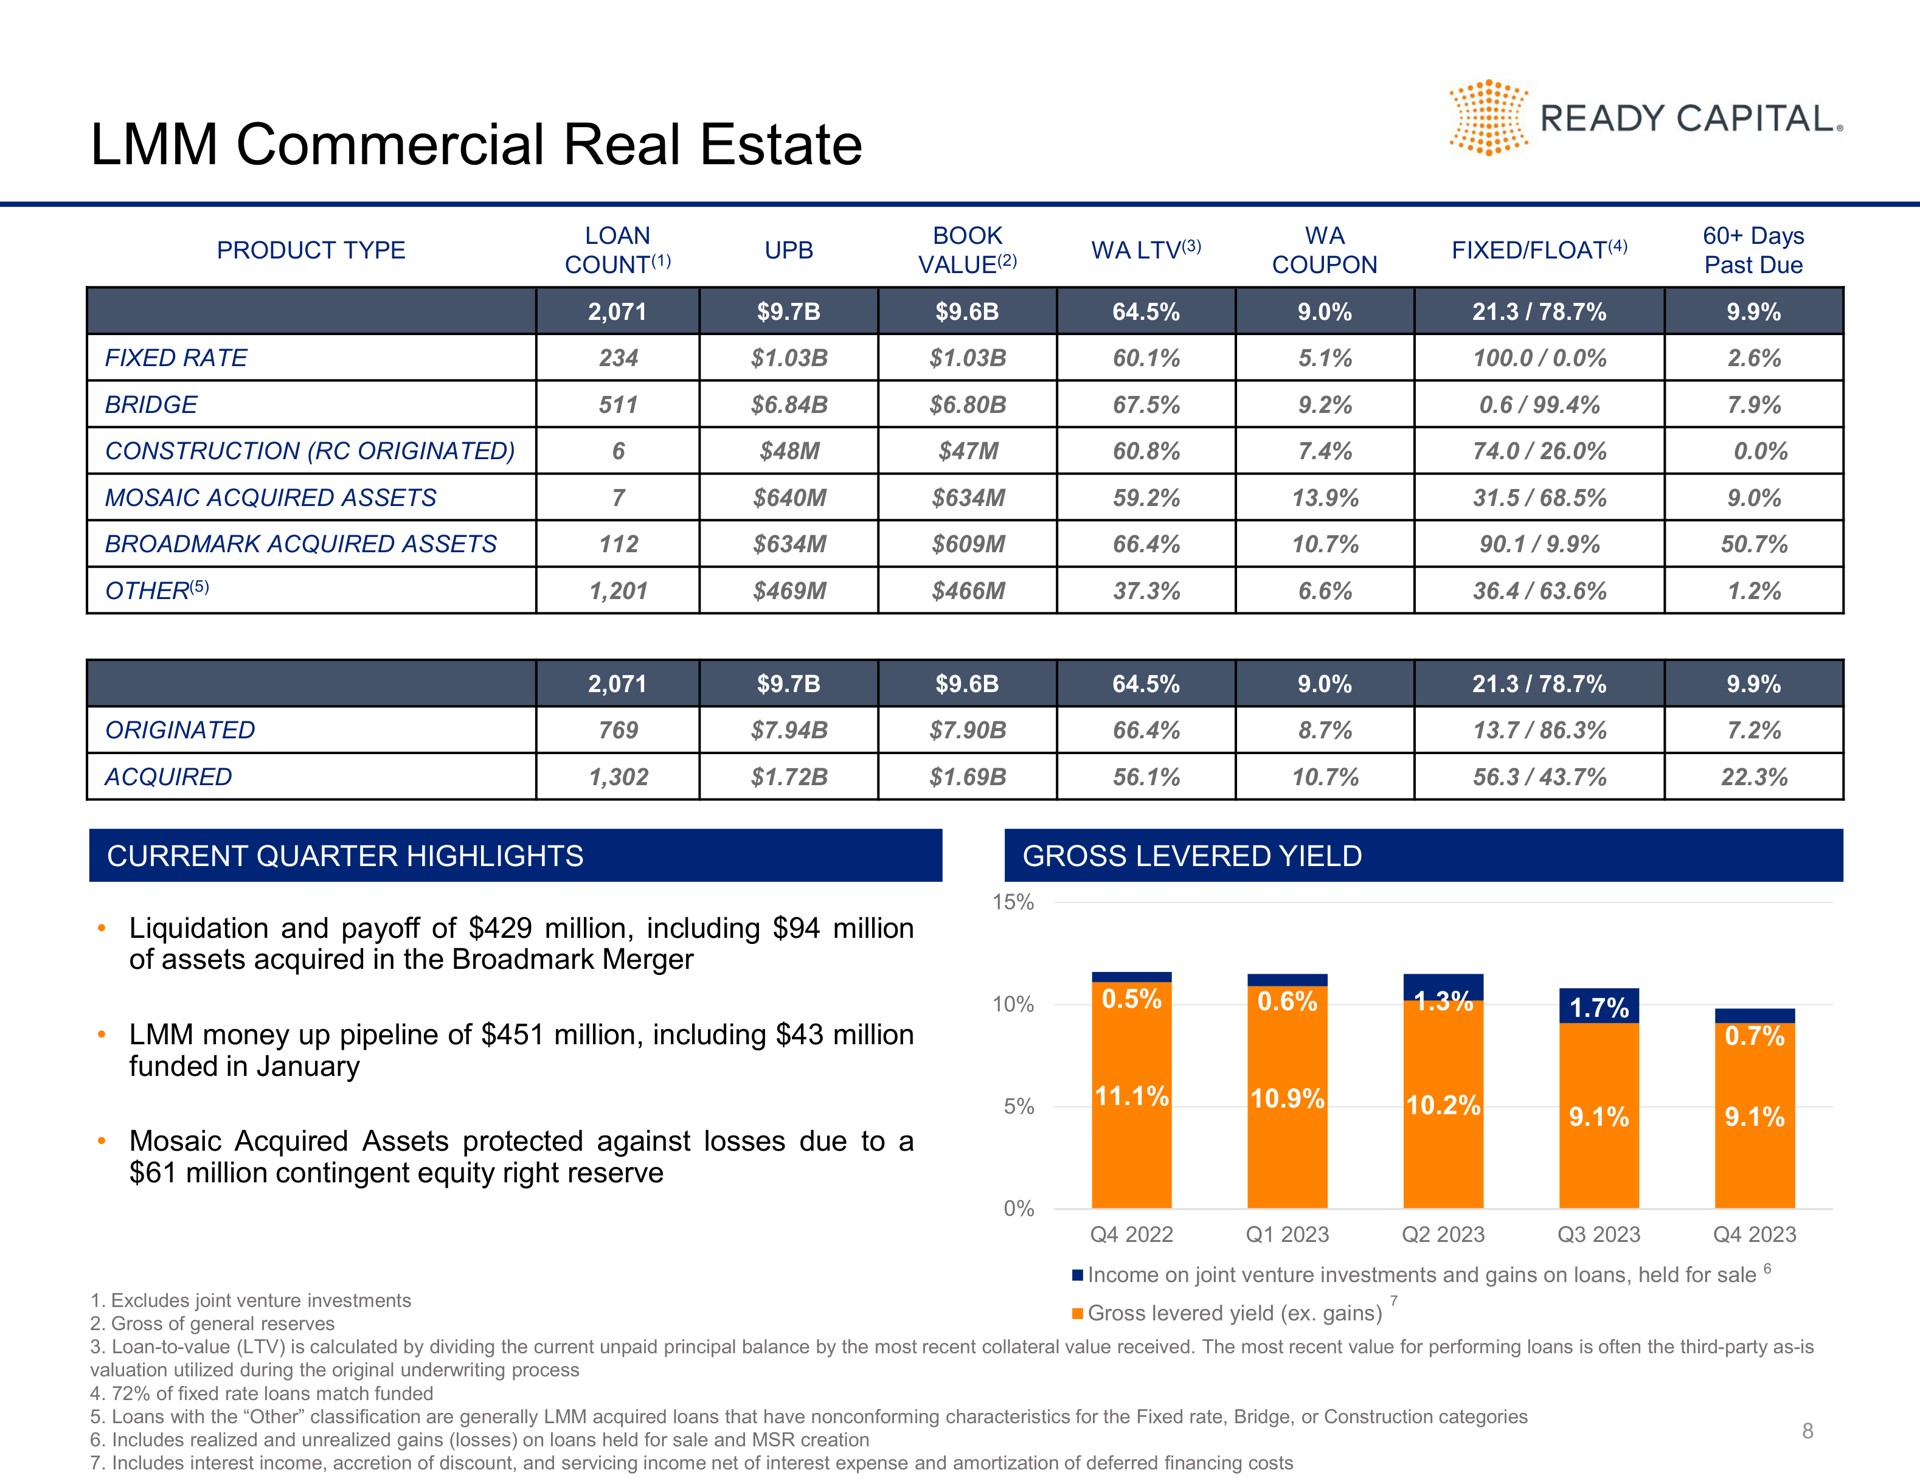 commercial real estate ready capital i count sar a originated acquired | Ready Capital